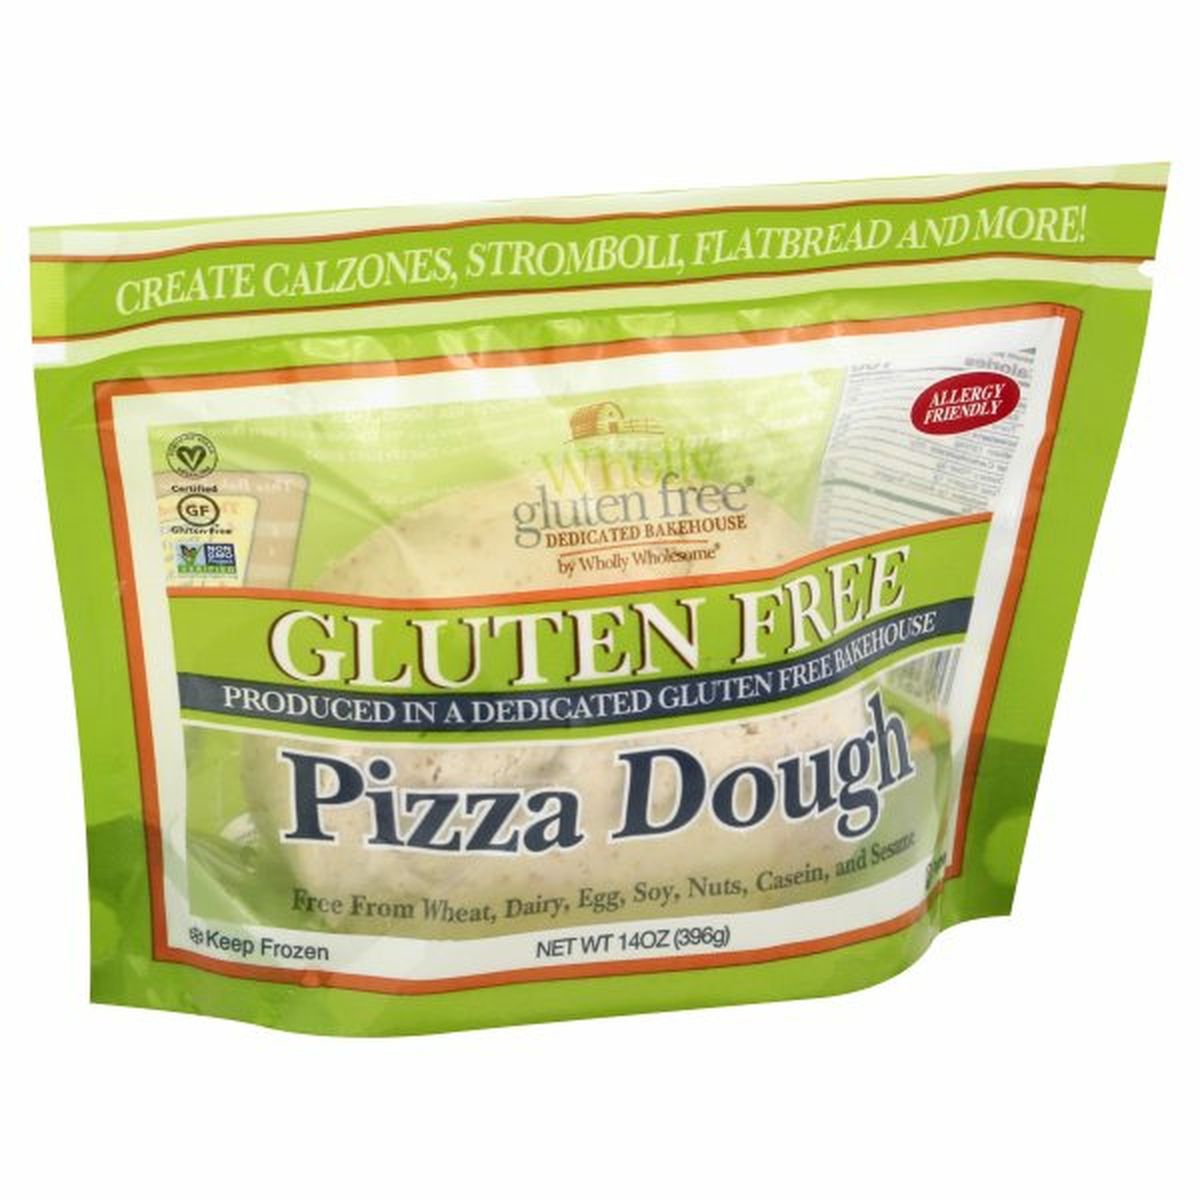 Calories in Wholly Gluten Free Pizza Dough